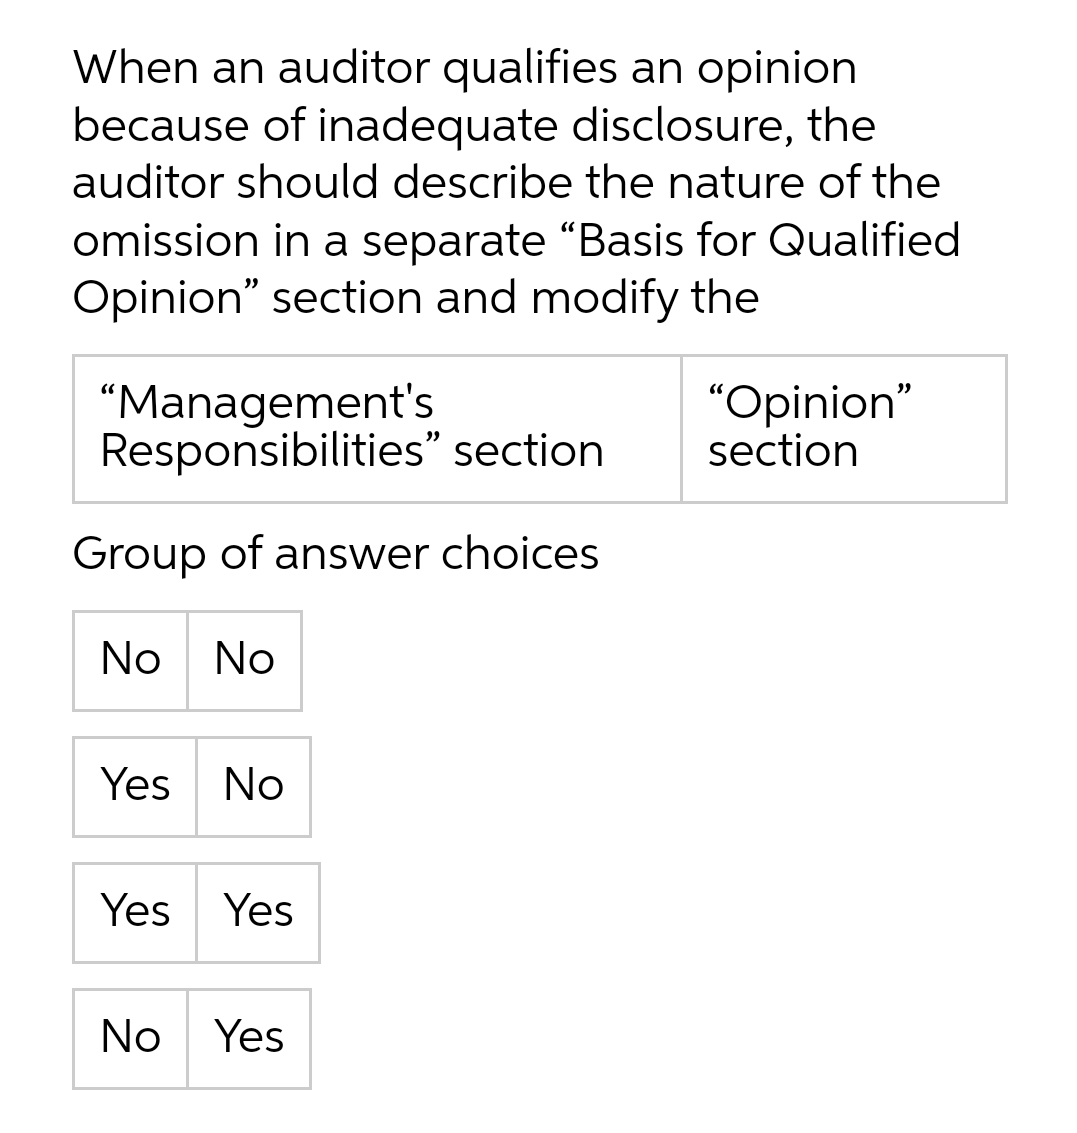 When an auditor qualifies an opinion
because of inadequate disclosure, the
auditor should describe the nature of the
omission in a separate “Basis for Qualified
Opinion" section and modify the
"Management's
Responsibilities" section
"Opinion"
section
Group of answer choices
No
No
Yes
No
Yes Yes
No
Yes
